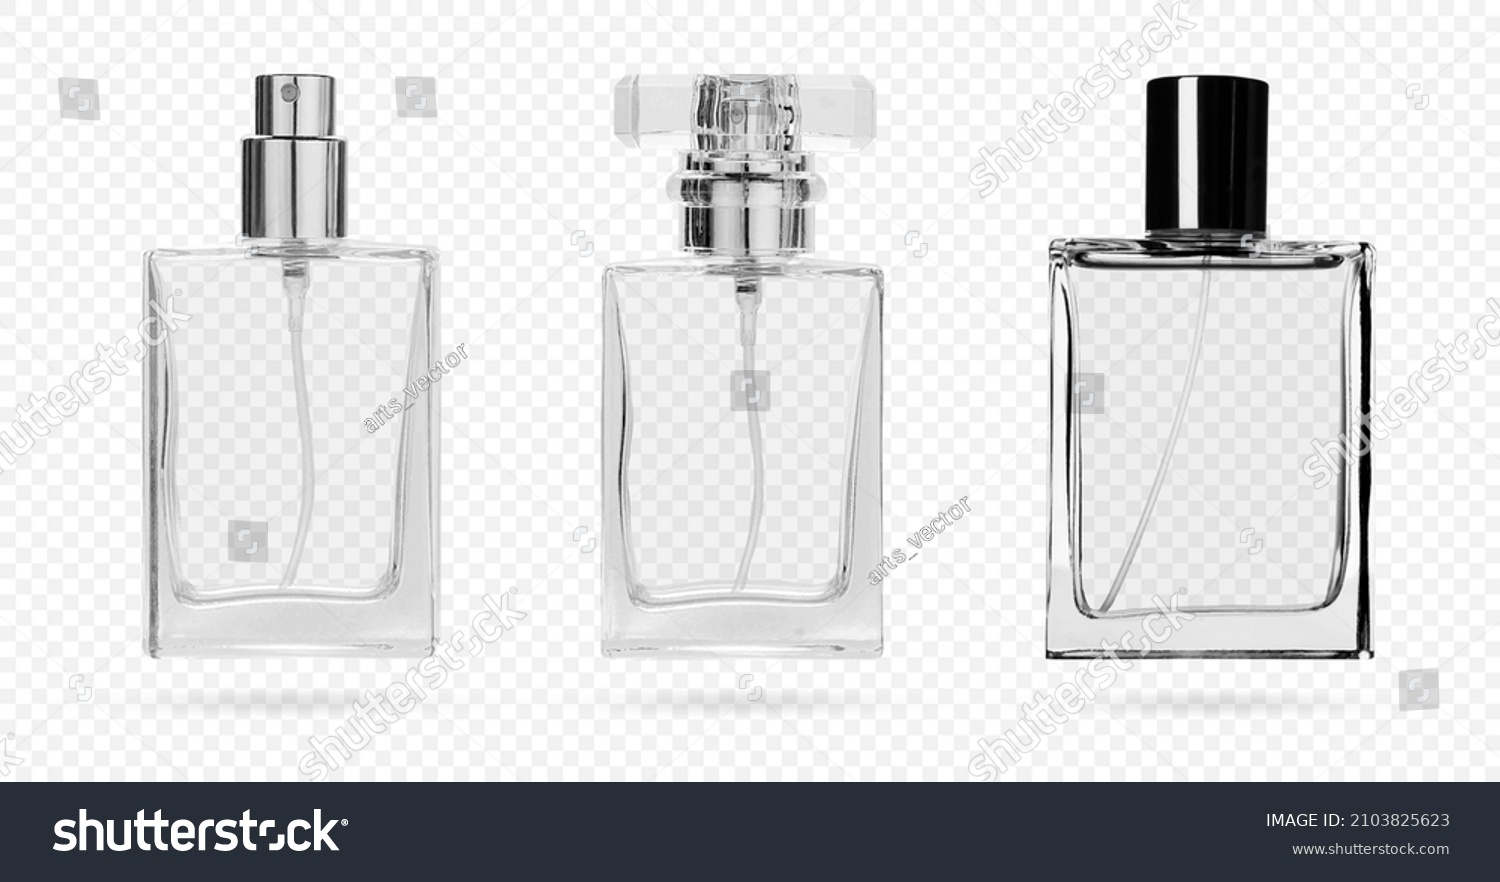 SVG of perfume bottle. glass bottle for perfume and perfumery .Vector illustration realistic 3d mockup. svg